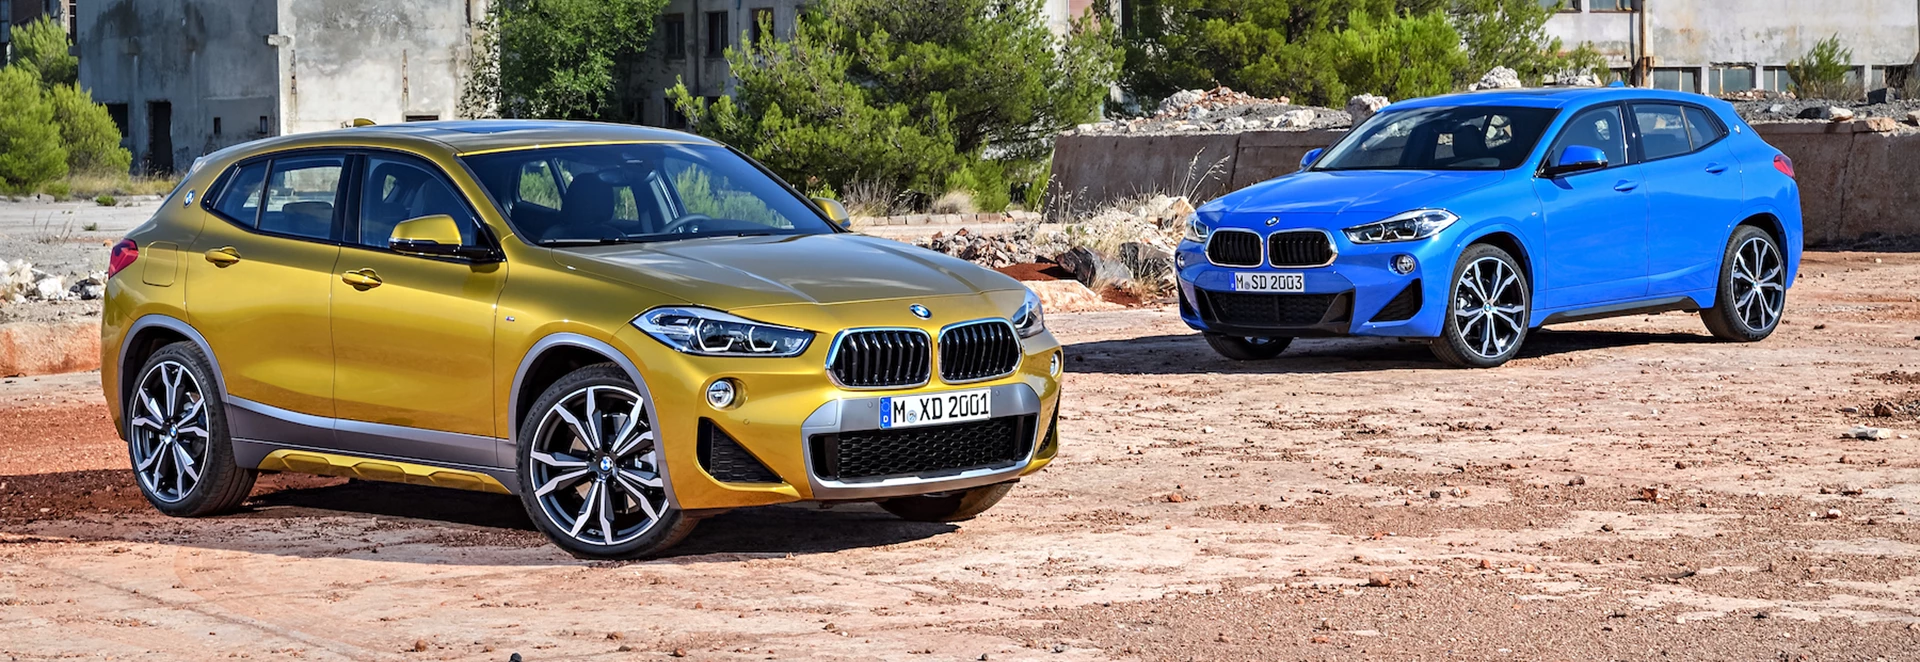 Buyer’s guide to the BMW X2 